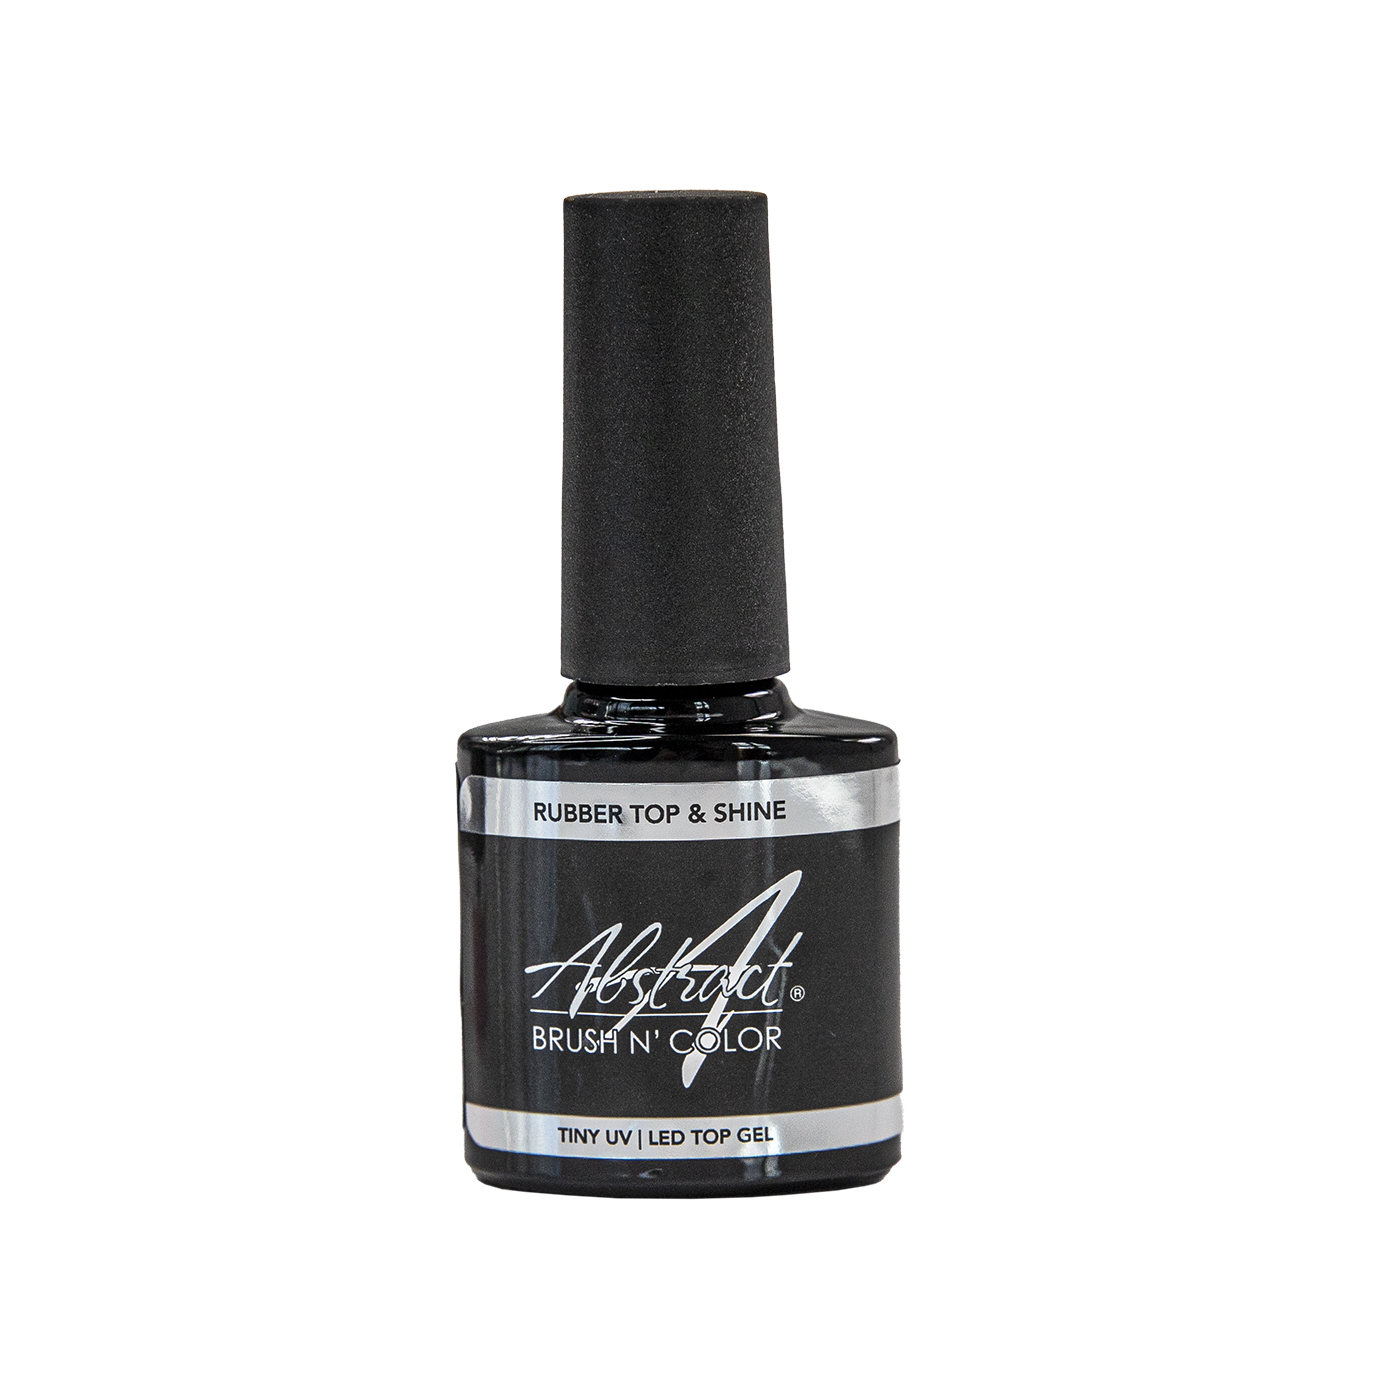 Rubber TOP & SHINE Top Gel 7,5ml, Abstract | 254240